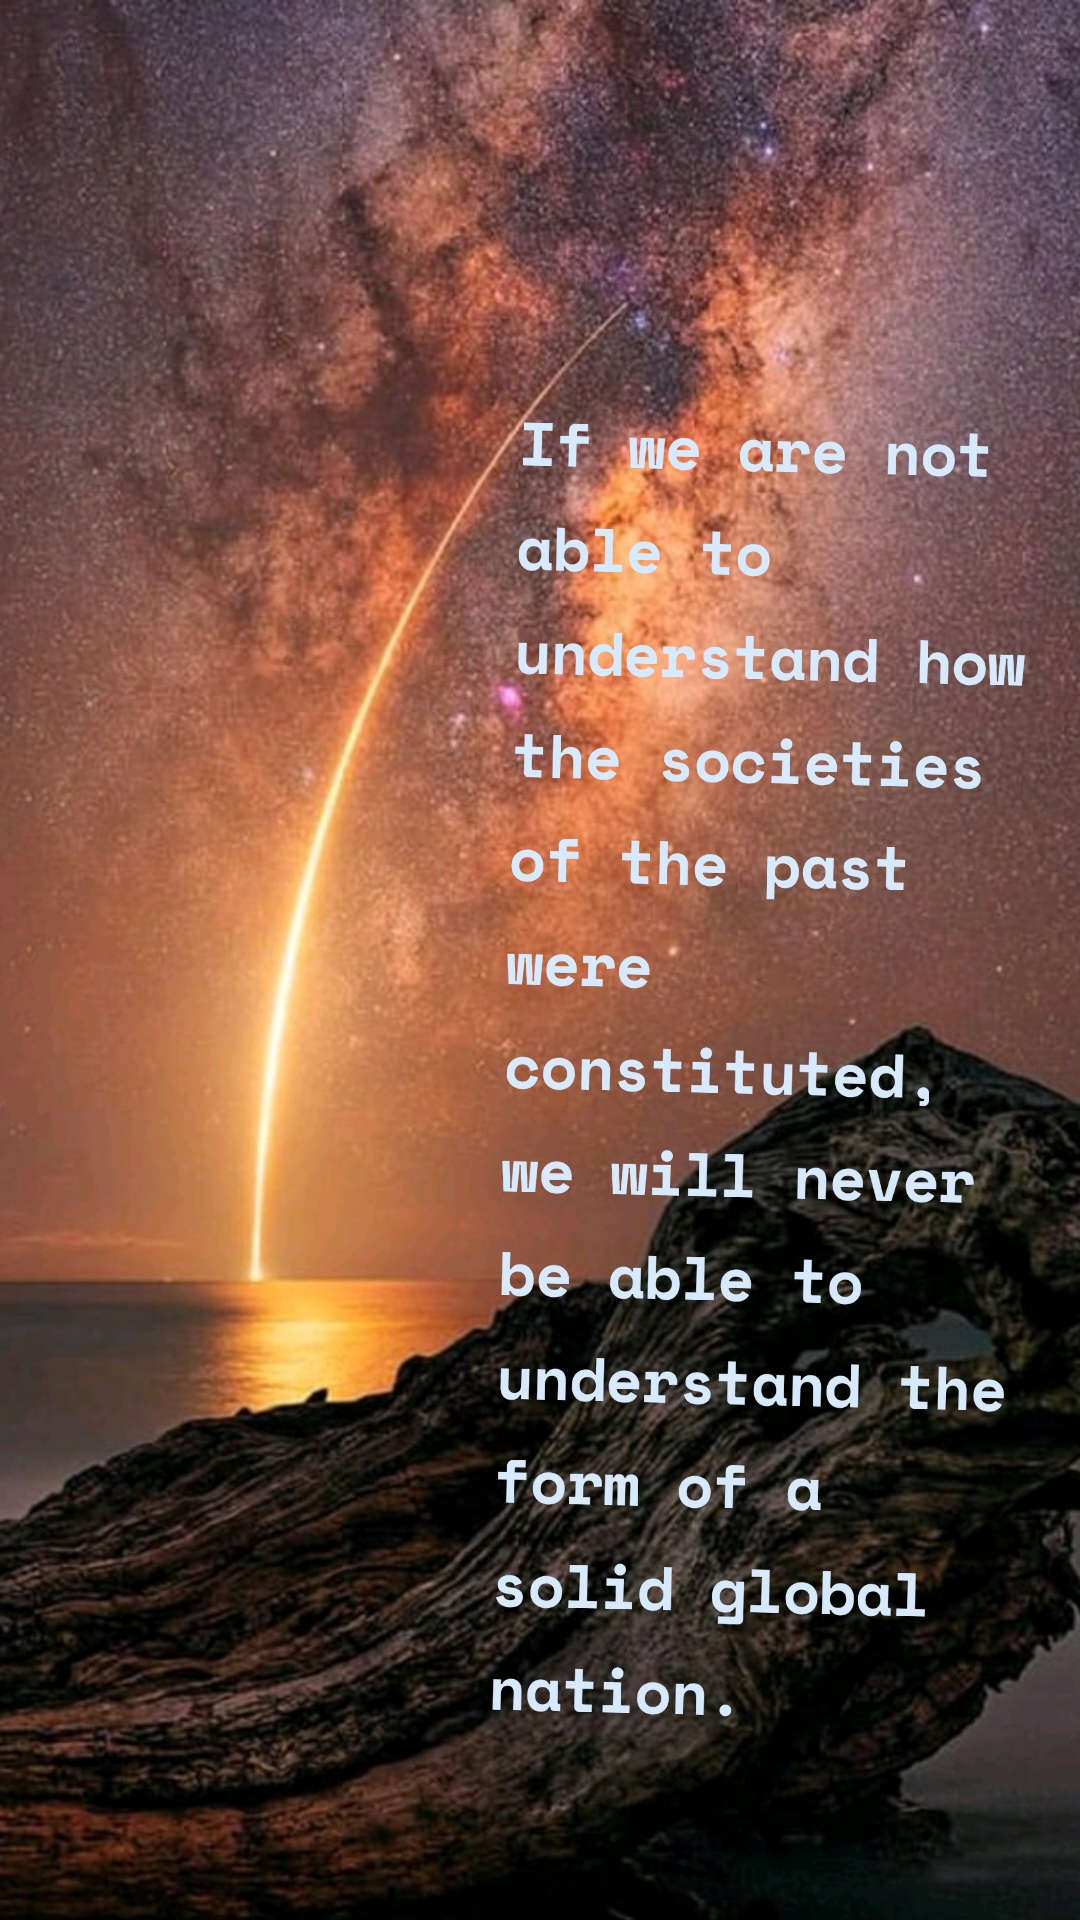 If we are not able to understand how the societies of the past were constituted, we will never be able to understand the form of a solid global nation. 